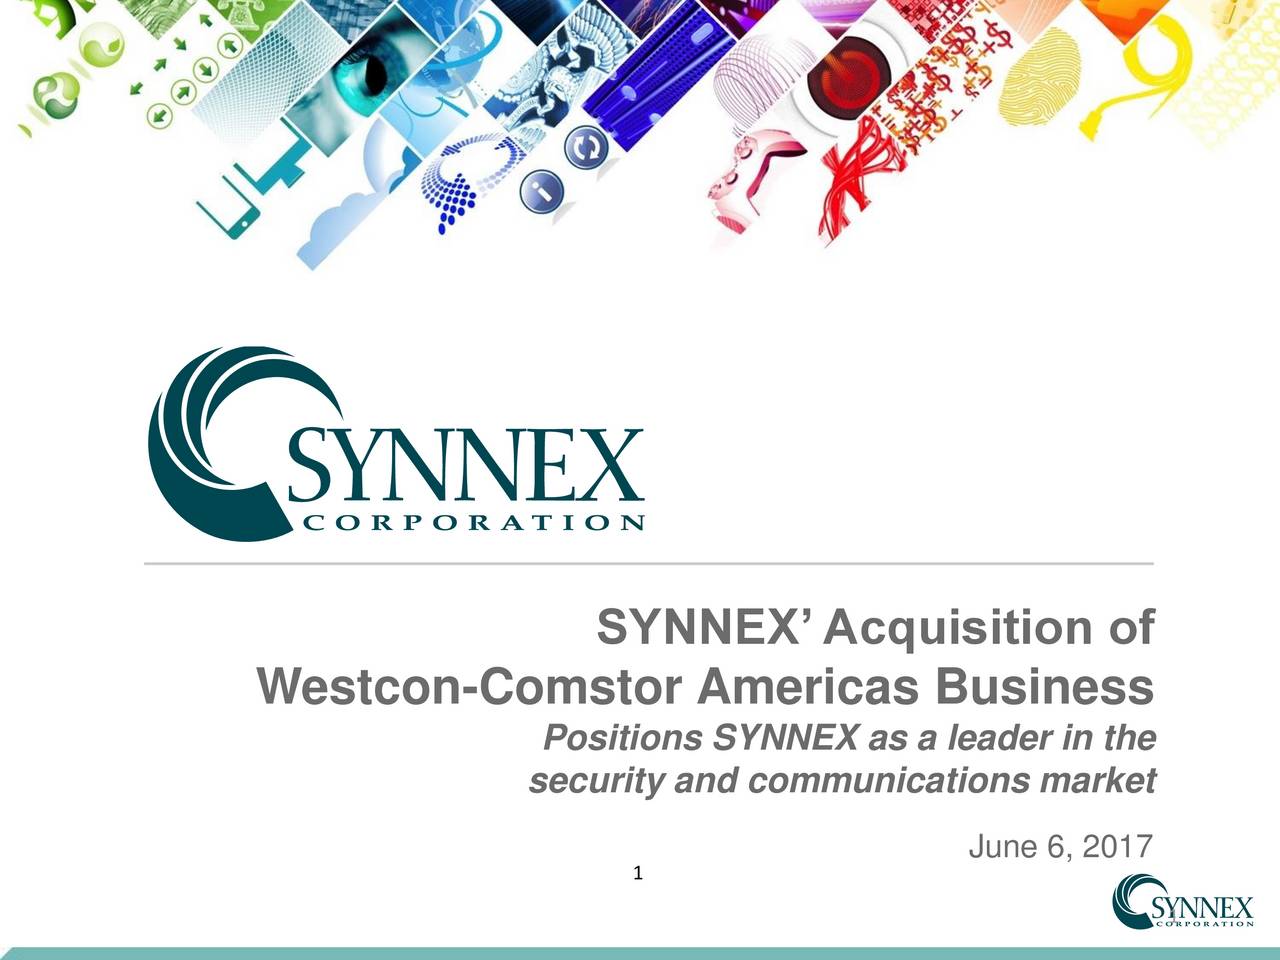 SYNNEX Logo - Synnex (SNX) Acquires Westcon-Comstor Americas Business for $600M ...